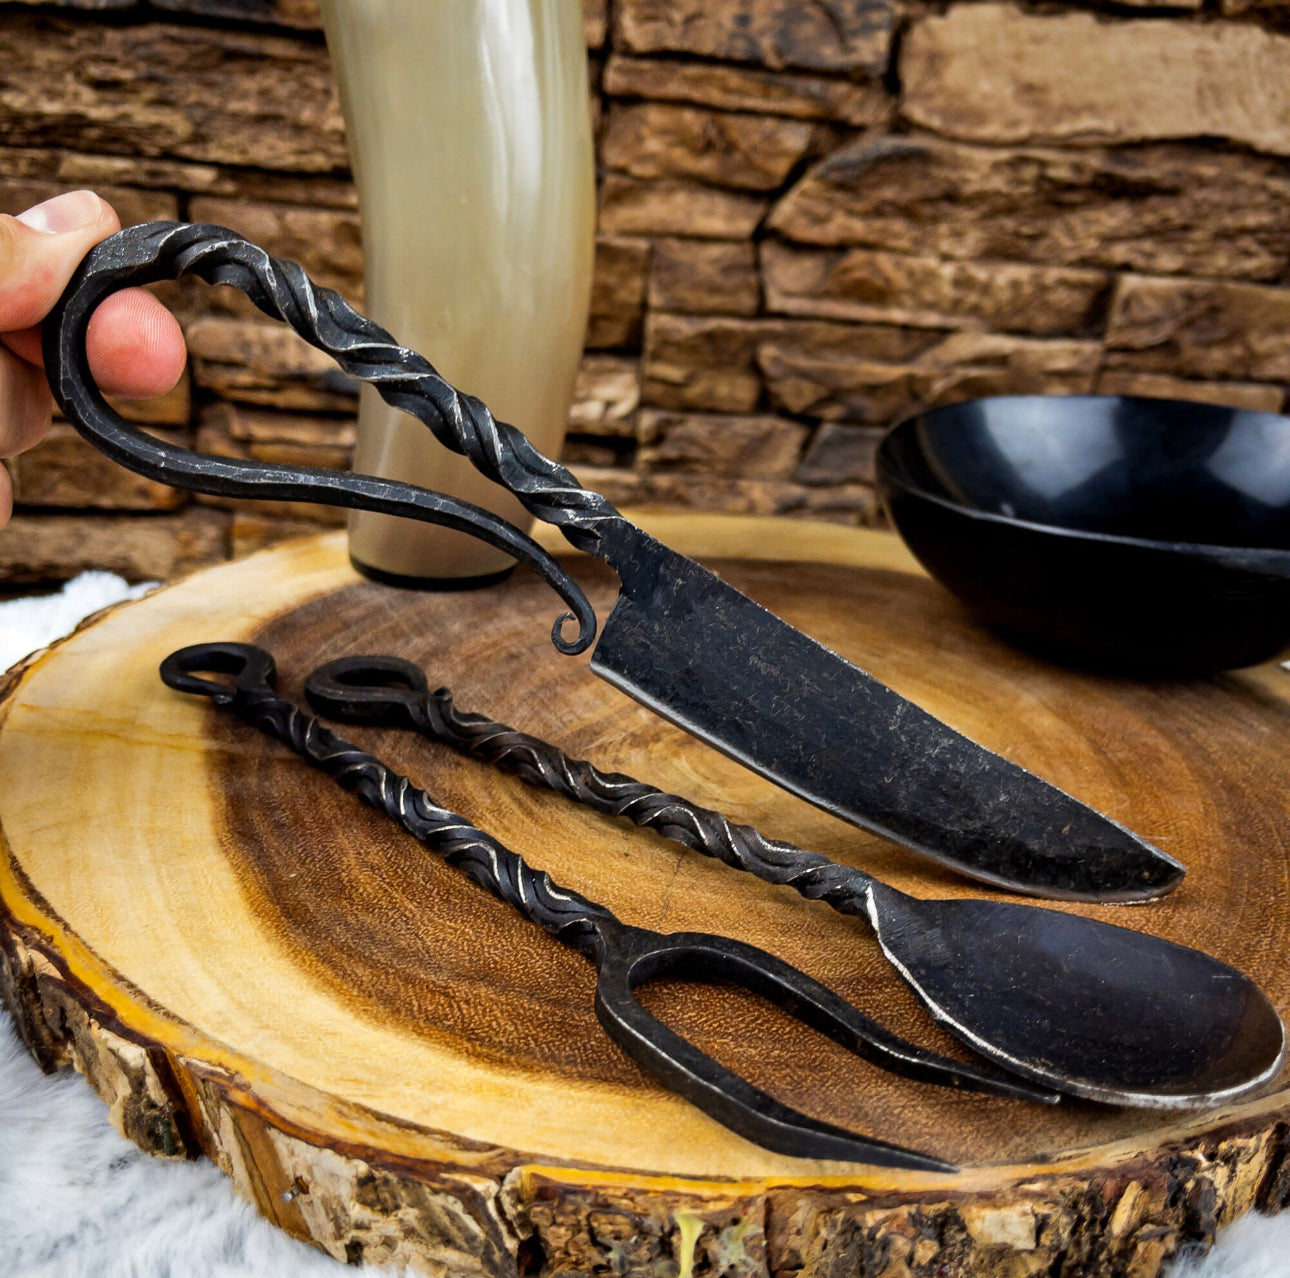 Emperor's Banquet 3PC Iron Silverware Set - Medieval Inspired Natural Iron Fork, Spoon, and Knife Cutlery Set for Camping & Reenactment